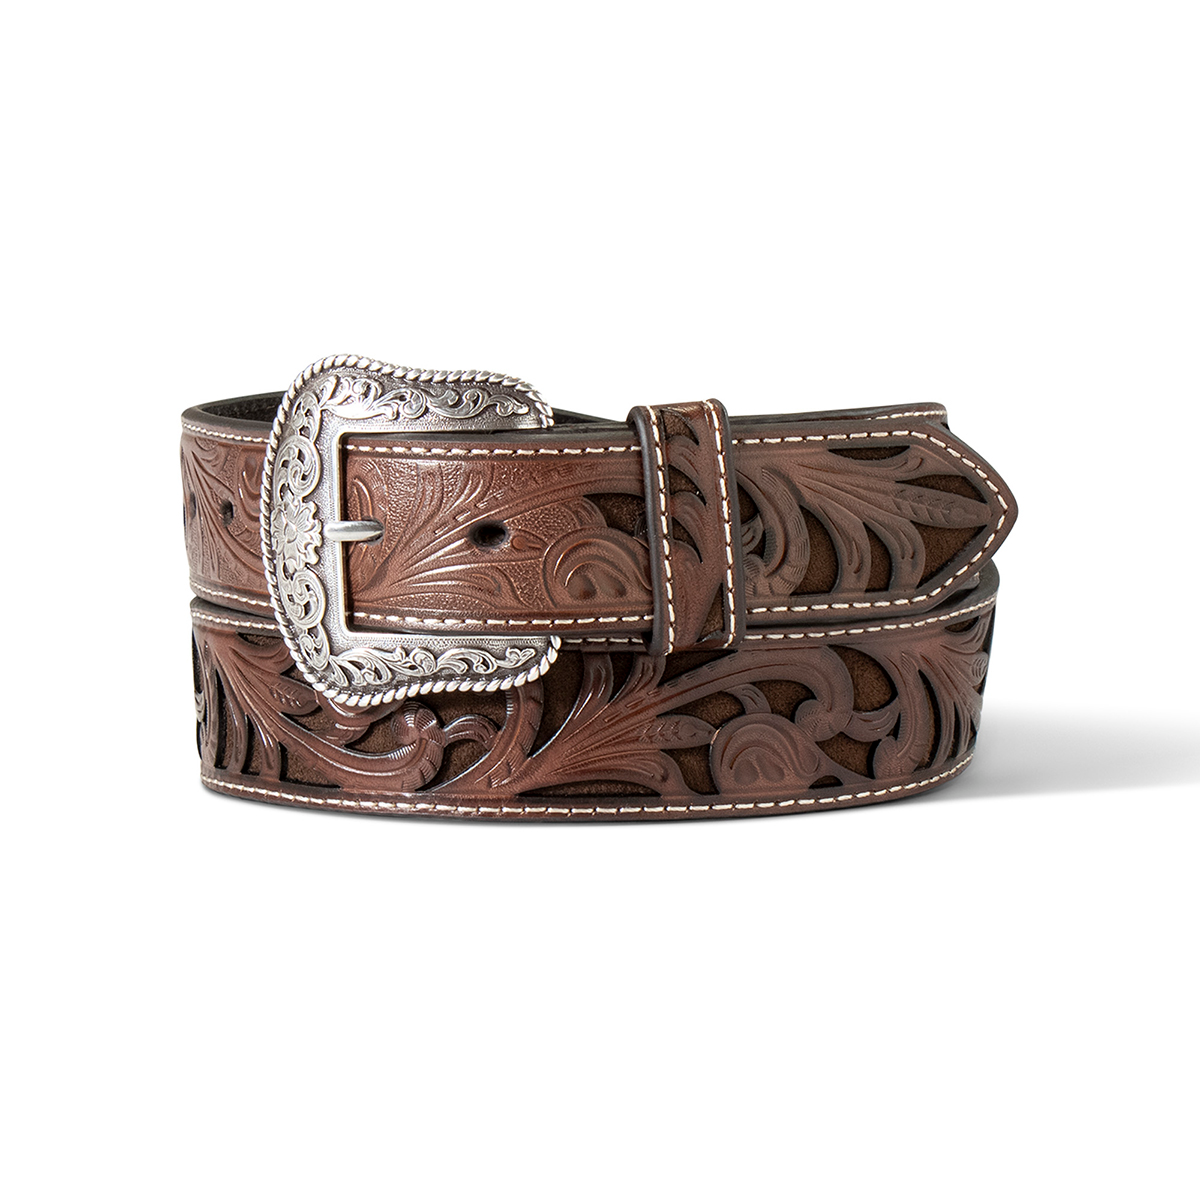 Ariat Women's Floral Embroidered Buck Lace Belt - Brown